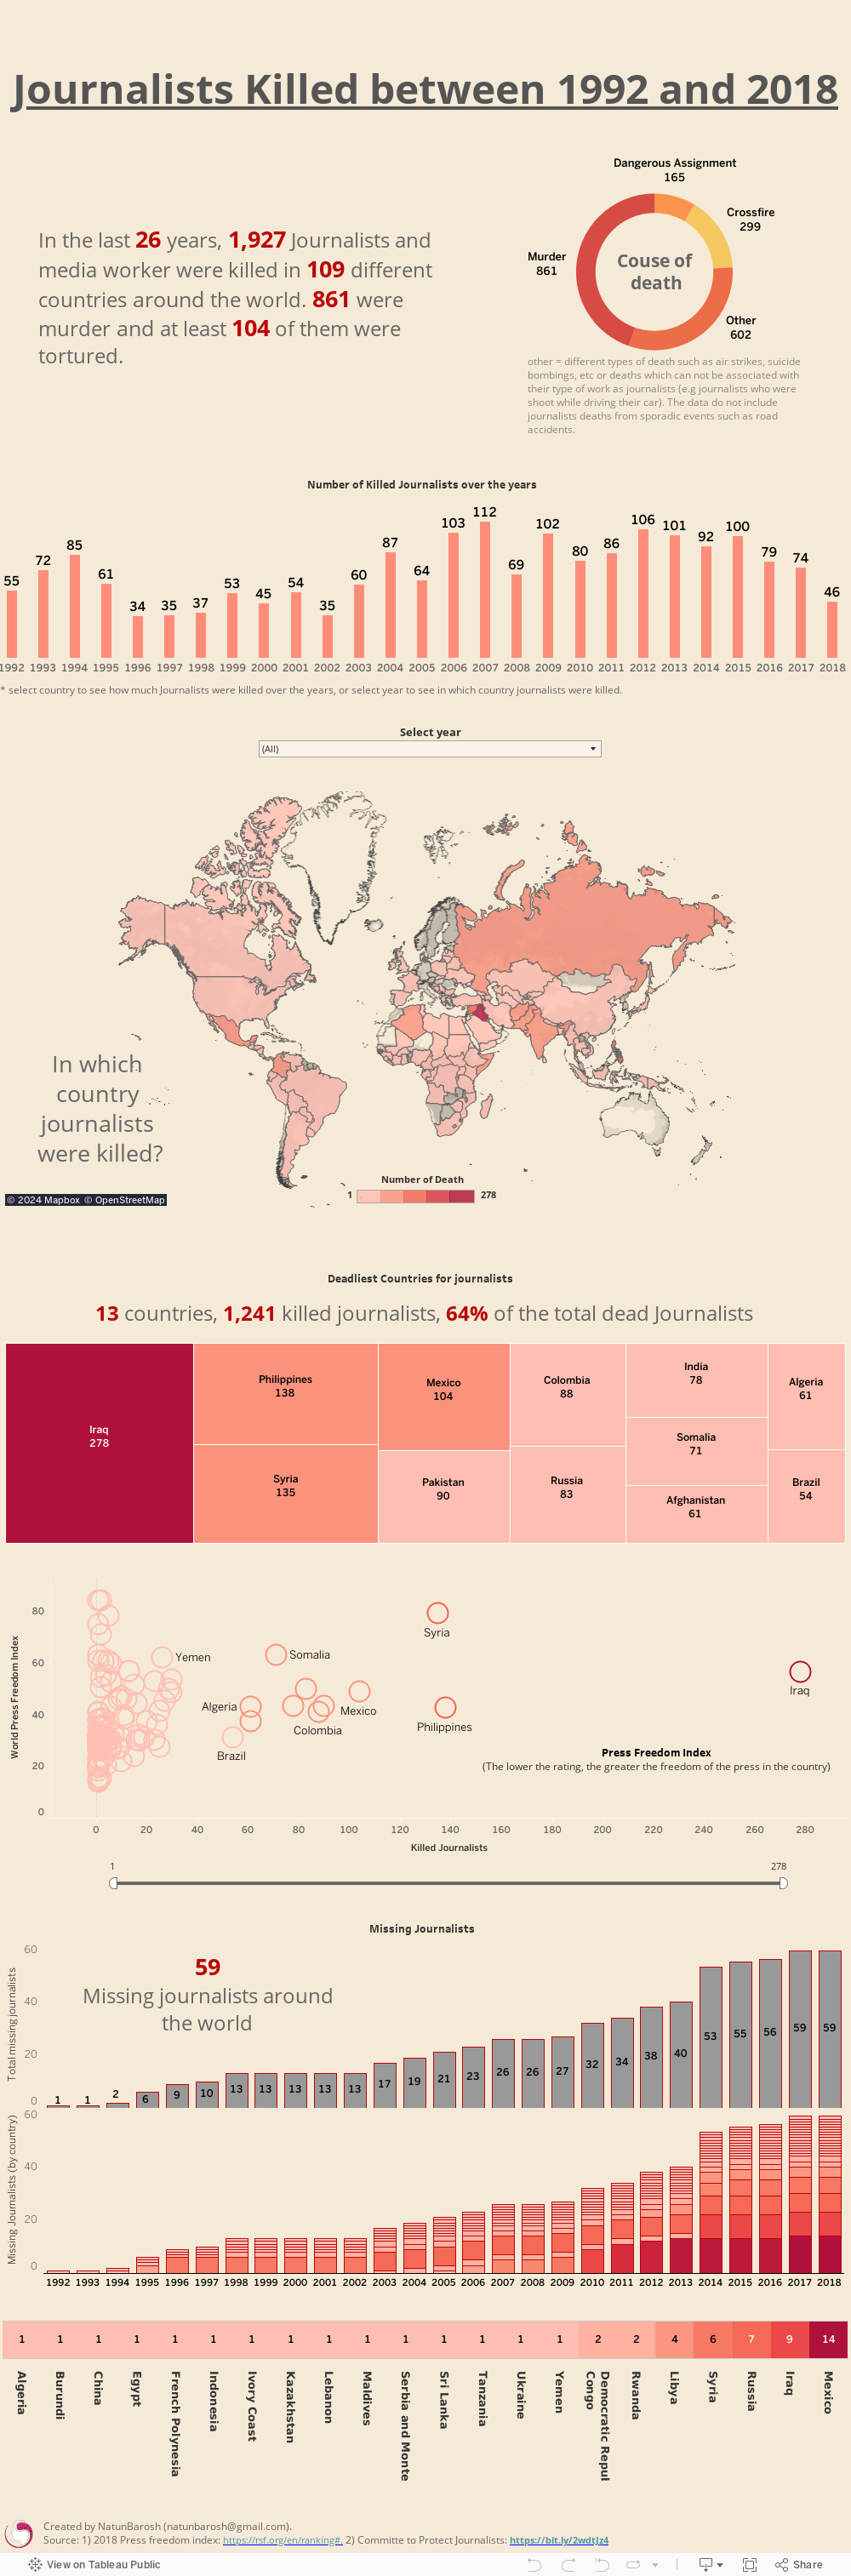 Journalists Killed between 1992 and 2018 